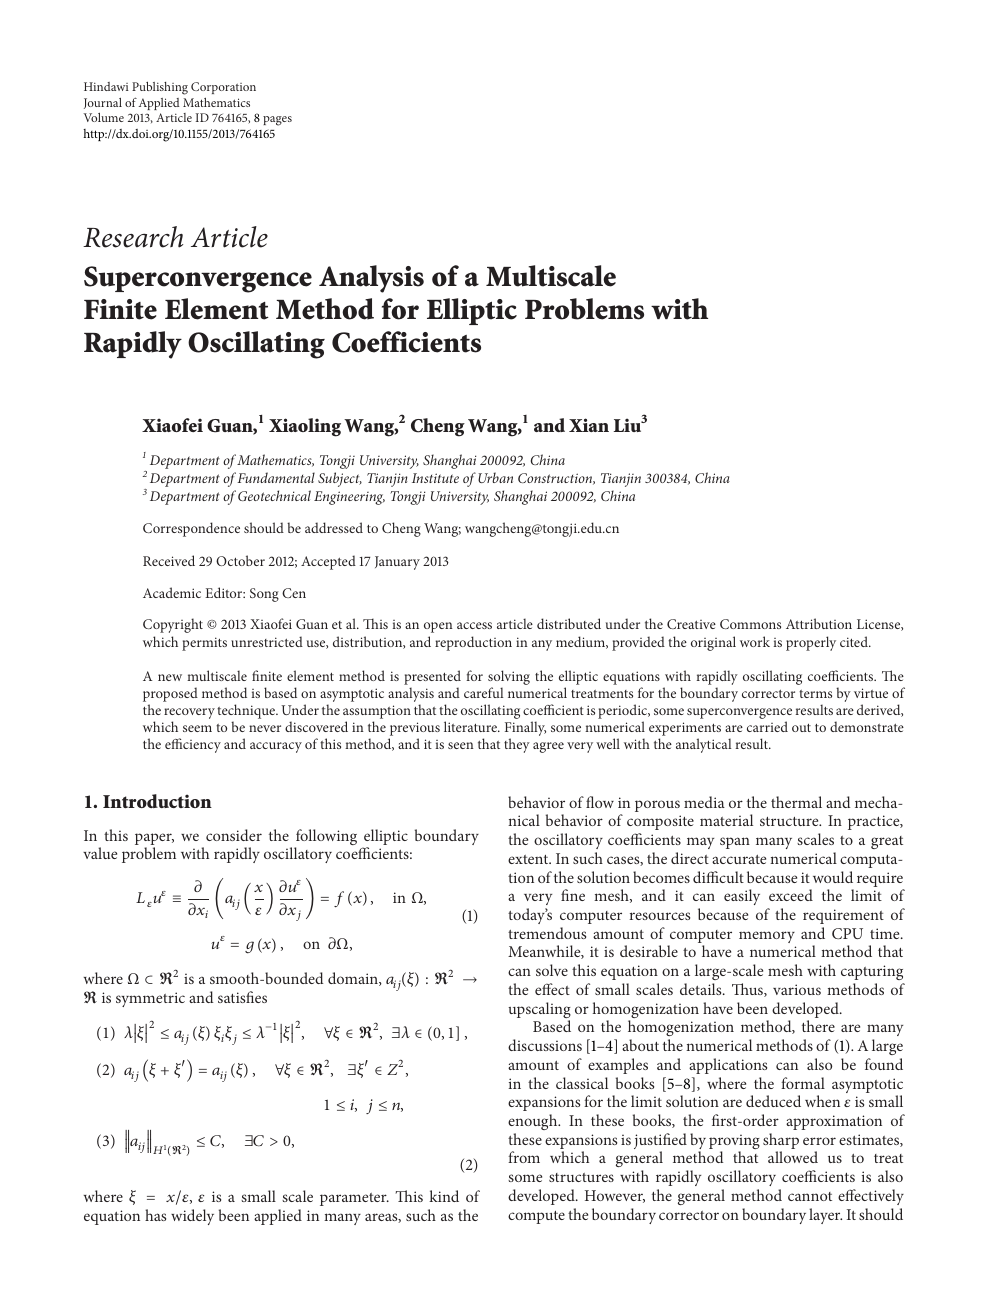 Superconvergence Analysis Of A Multiscale Finite Element Method For Elliptic Problems With Rapidly Oscillating Coefficients Topic Of Research Paper In Mathematics Download Scholarly Article Pdf And Read For Free On Cyberleninka